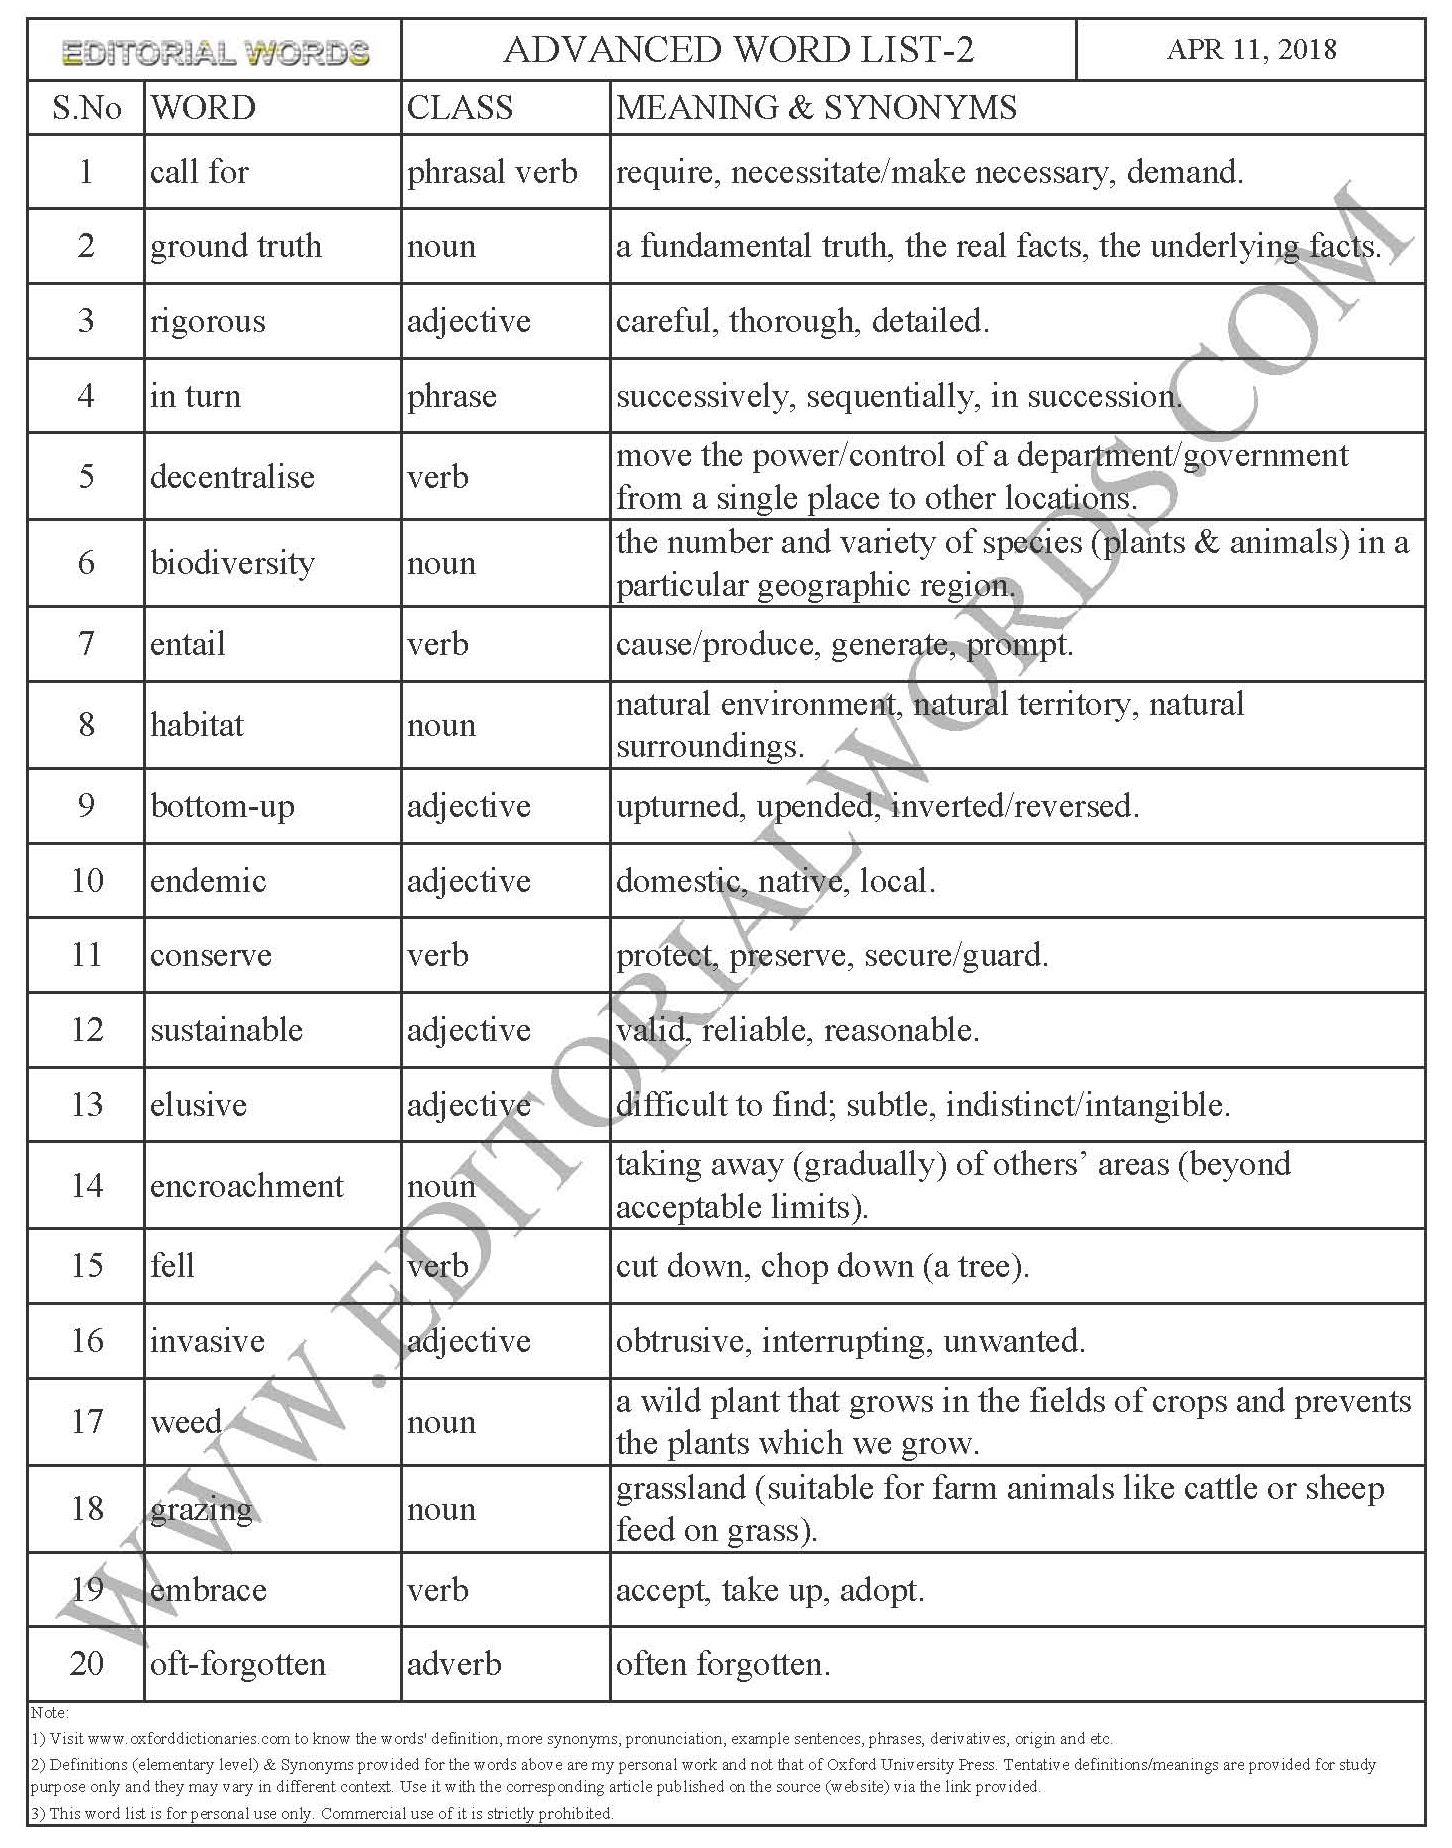 Advanced Word List 2 Learn English Improve Vocabulary A Register By The People The Hindu Apr 